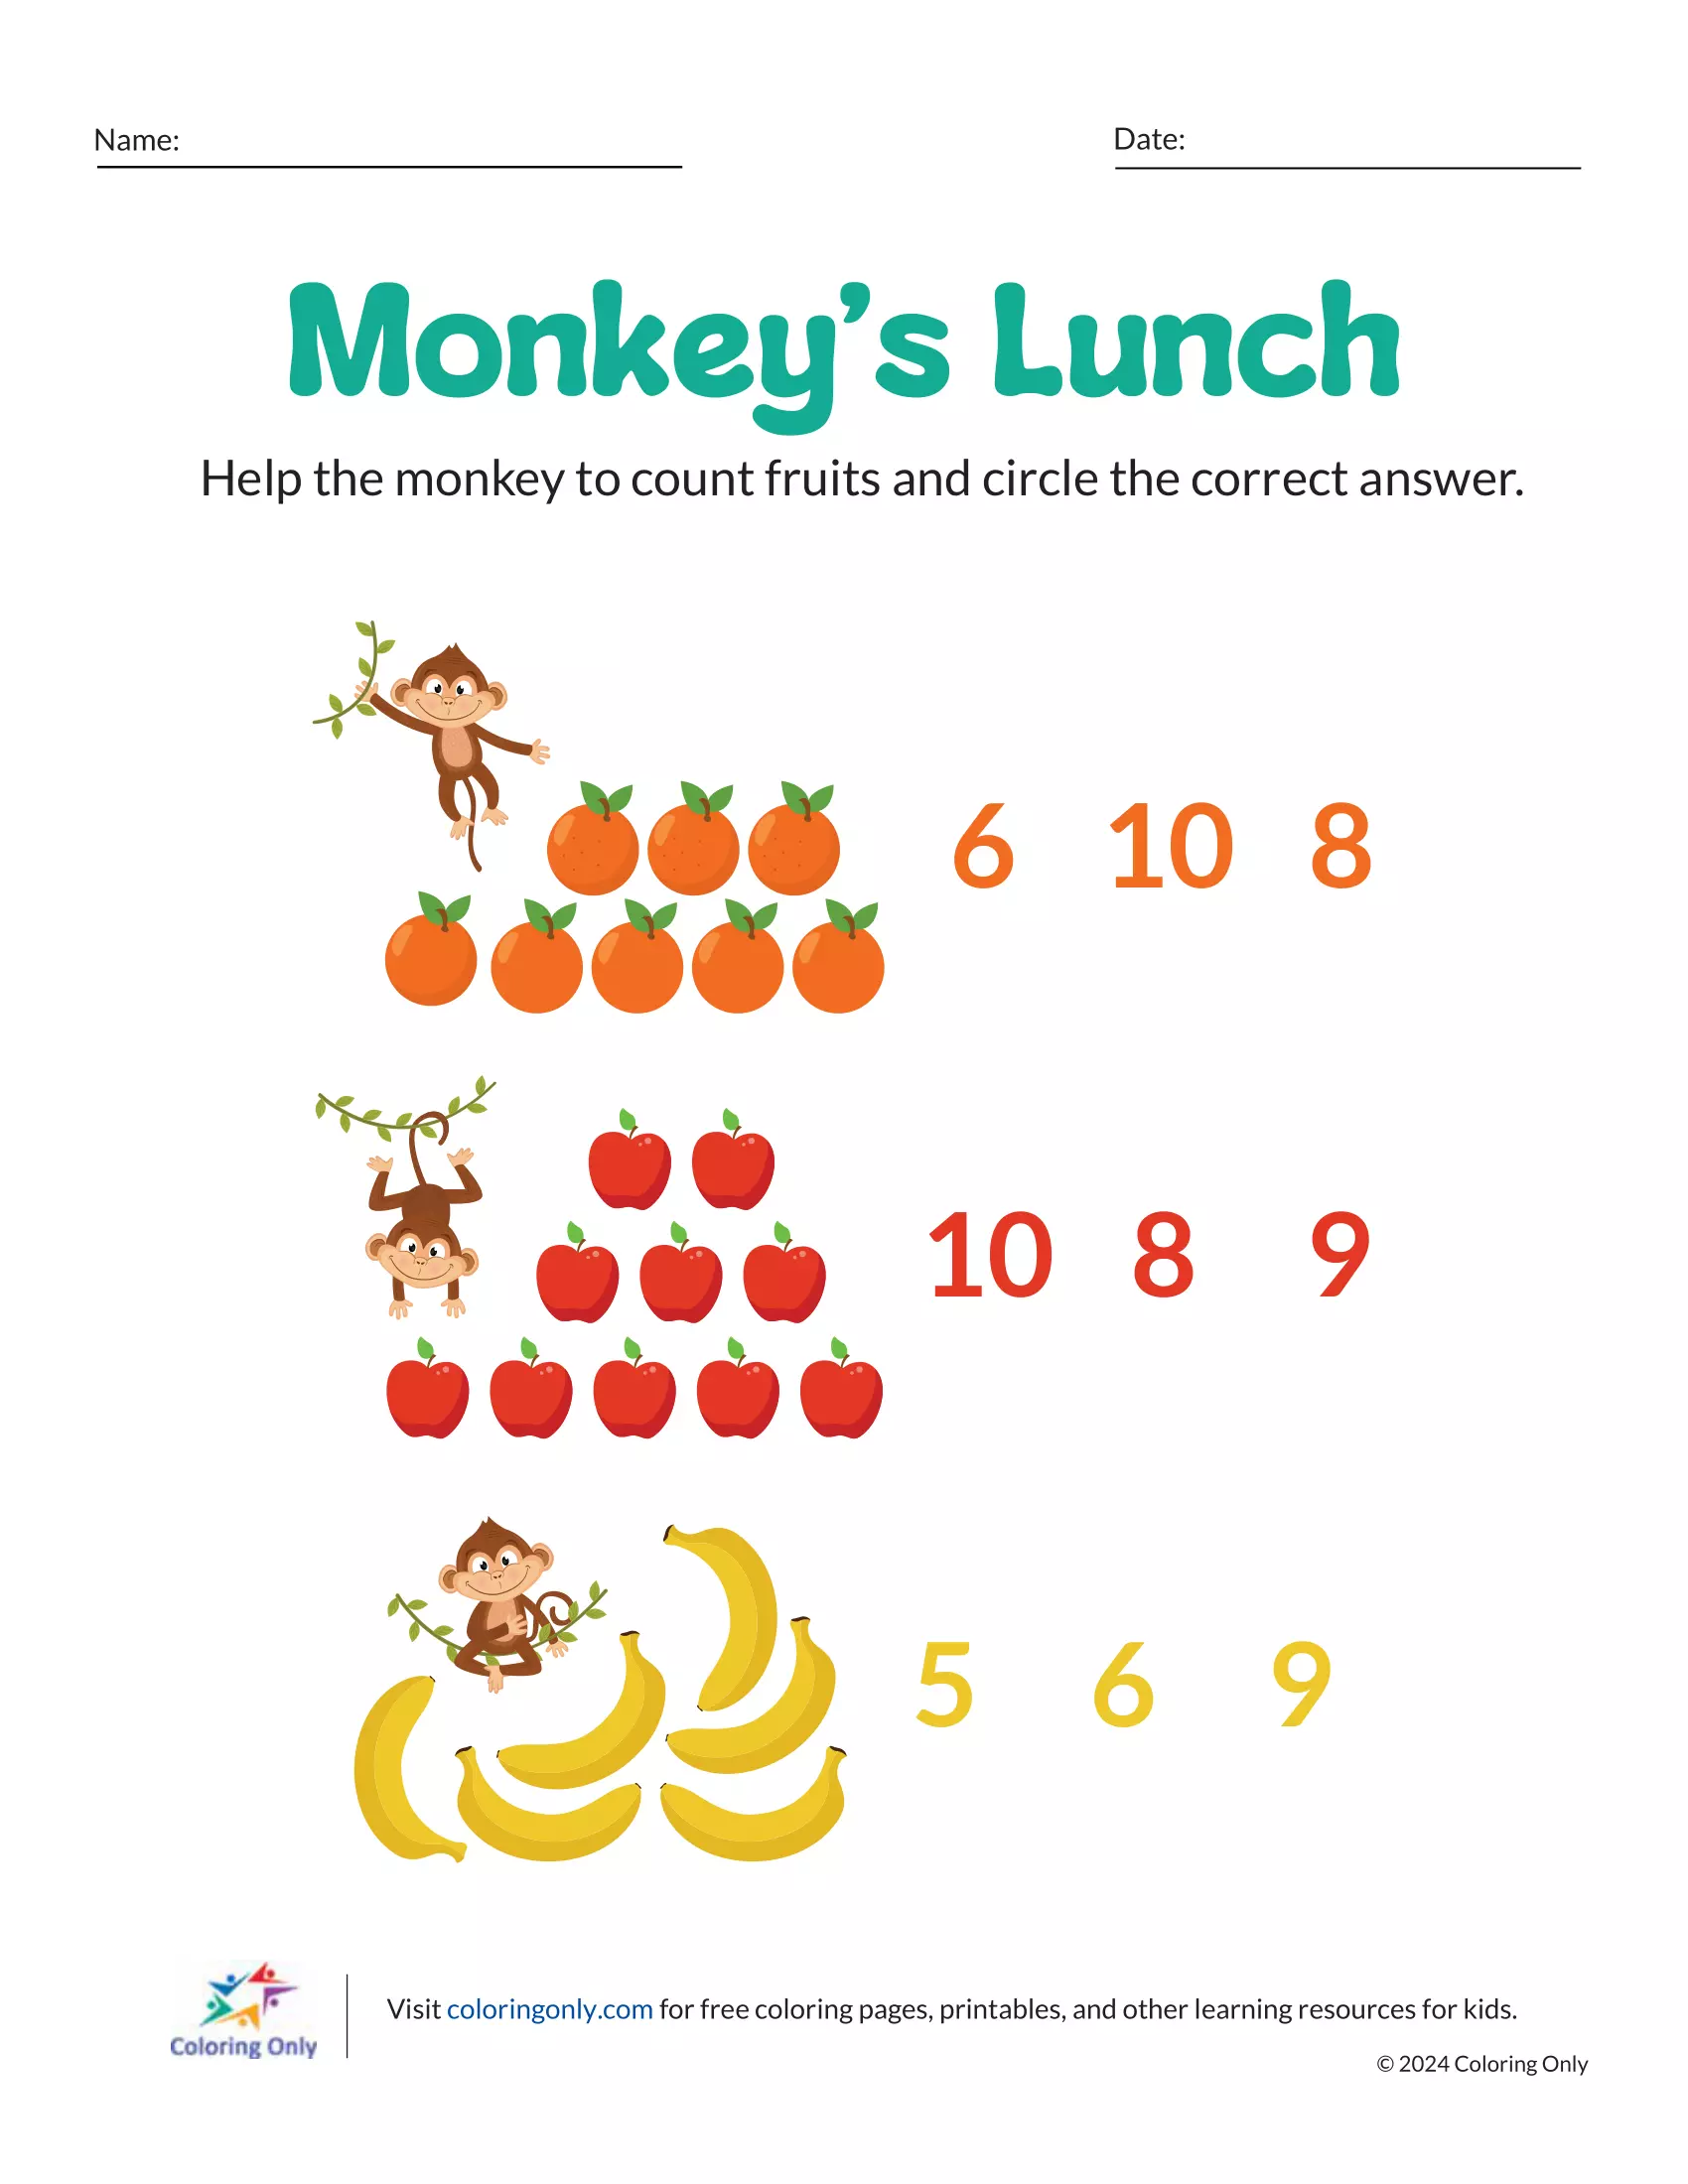 Engage preschoolers with the free printable worksheet "Monkey's Lunch" to practice counting and number recognition in a fun, fruity setting!